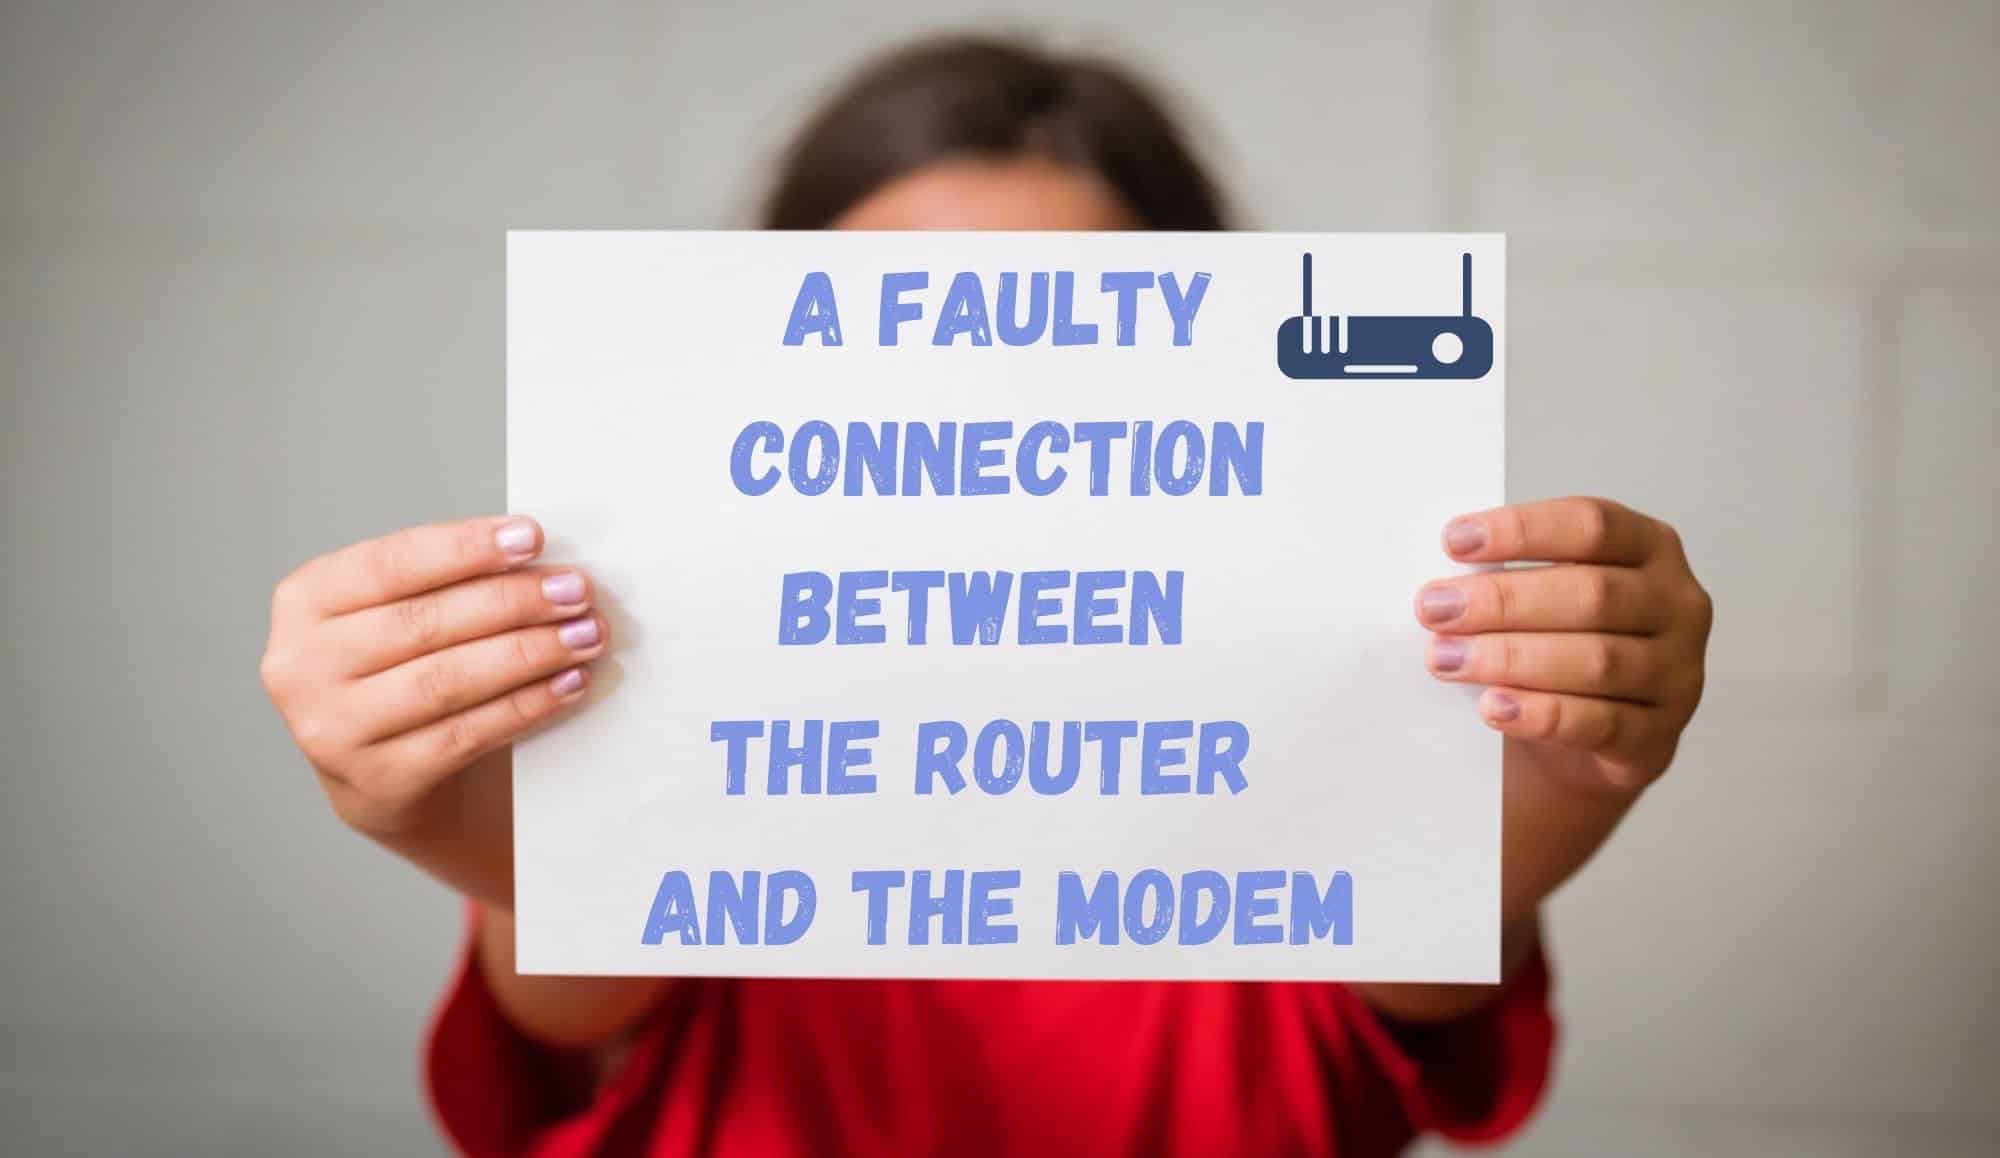 A faulty connection between the router and the modem